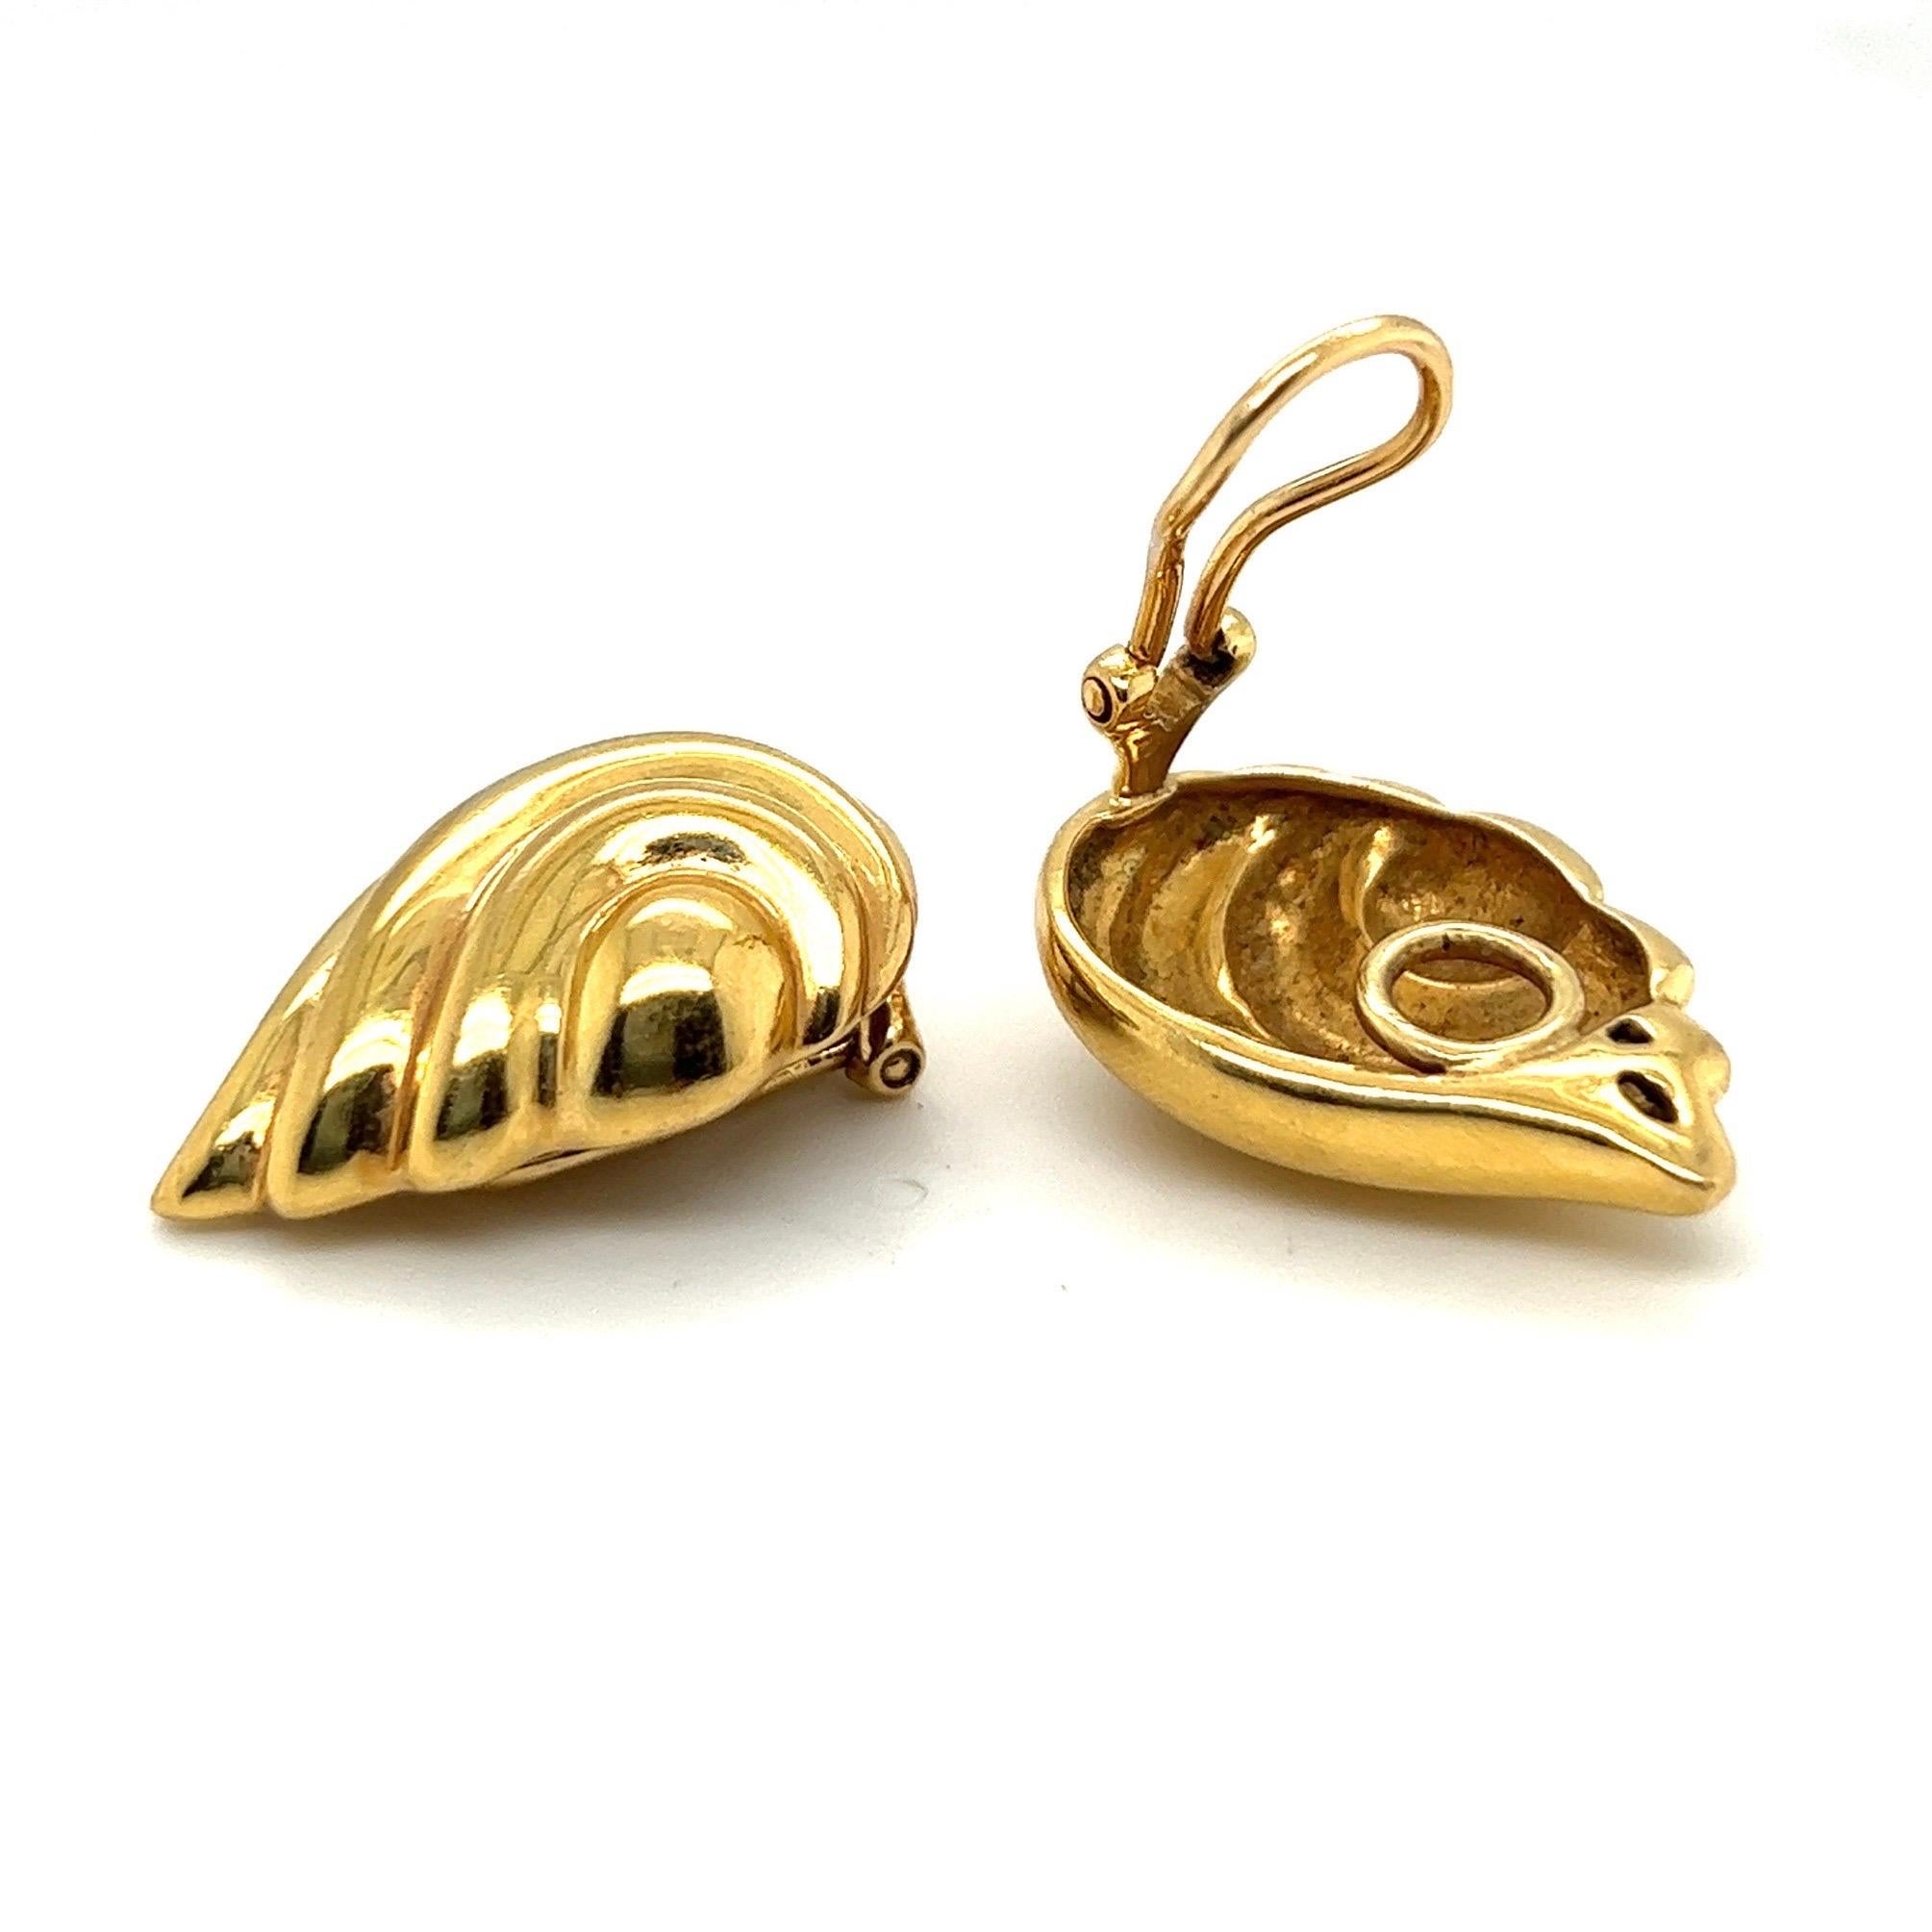 Stylish pair of 18 Karat Yellow Gold Earrings by Verdura.
Crafted in 18 karat ribbed yellow gold and designed as sculpted leaves, these beautiful earrings are meant to be worn up the lobe. 
They are completed by comfortable hinged omega backs.
The